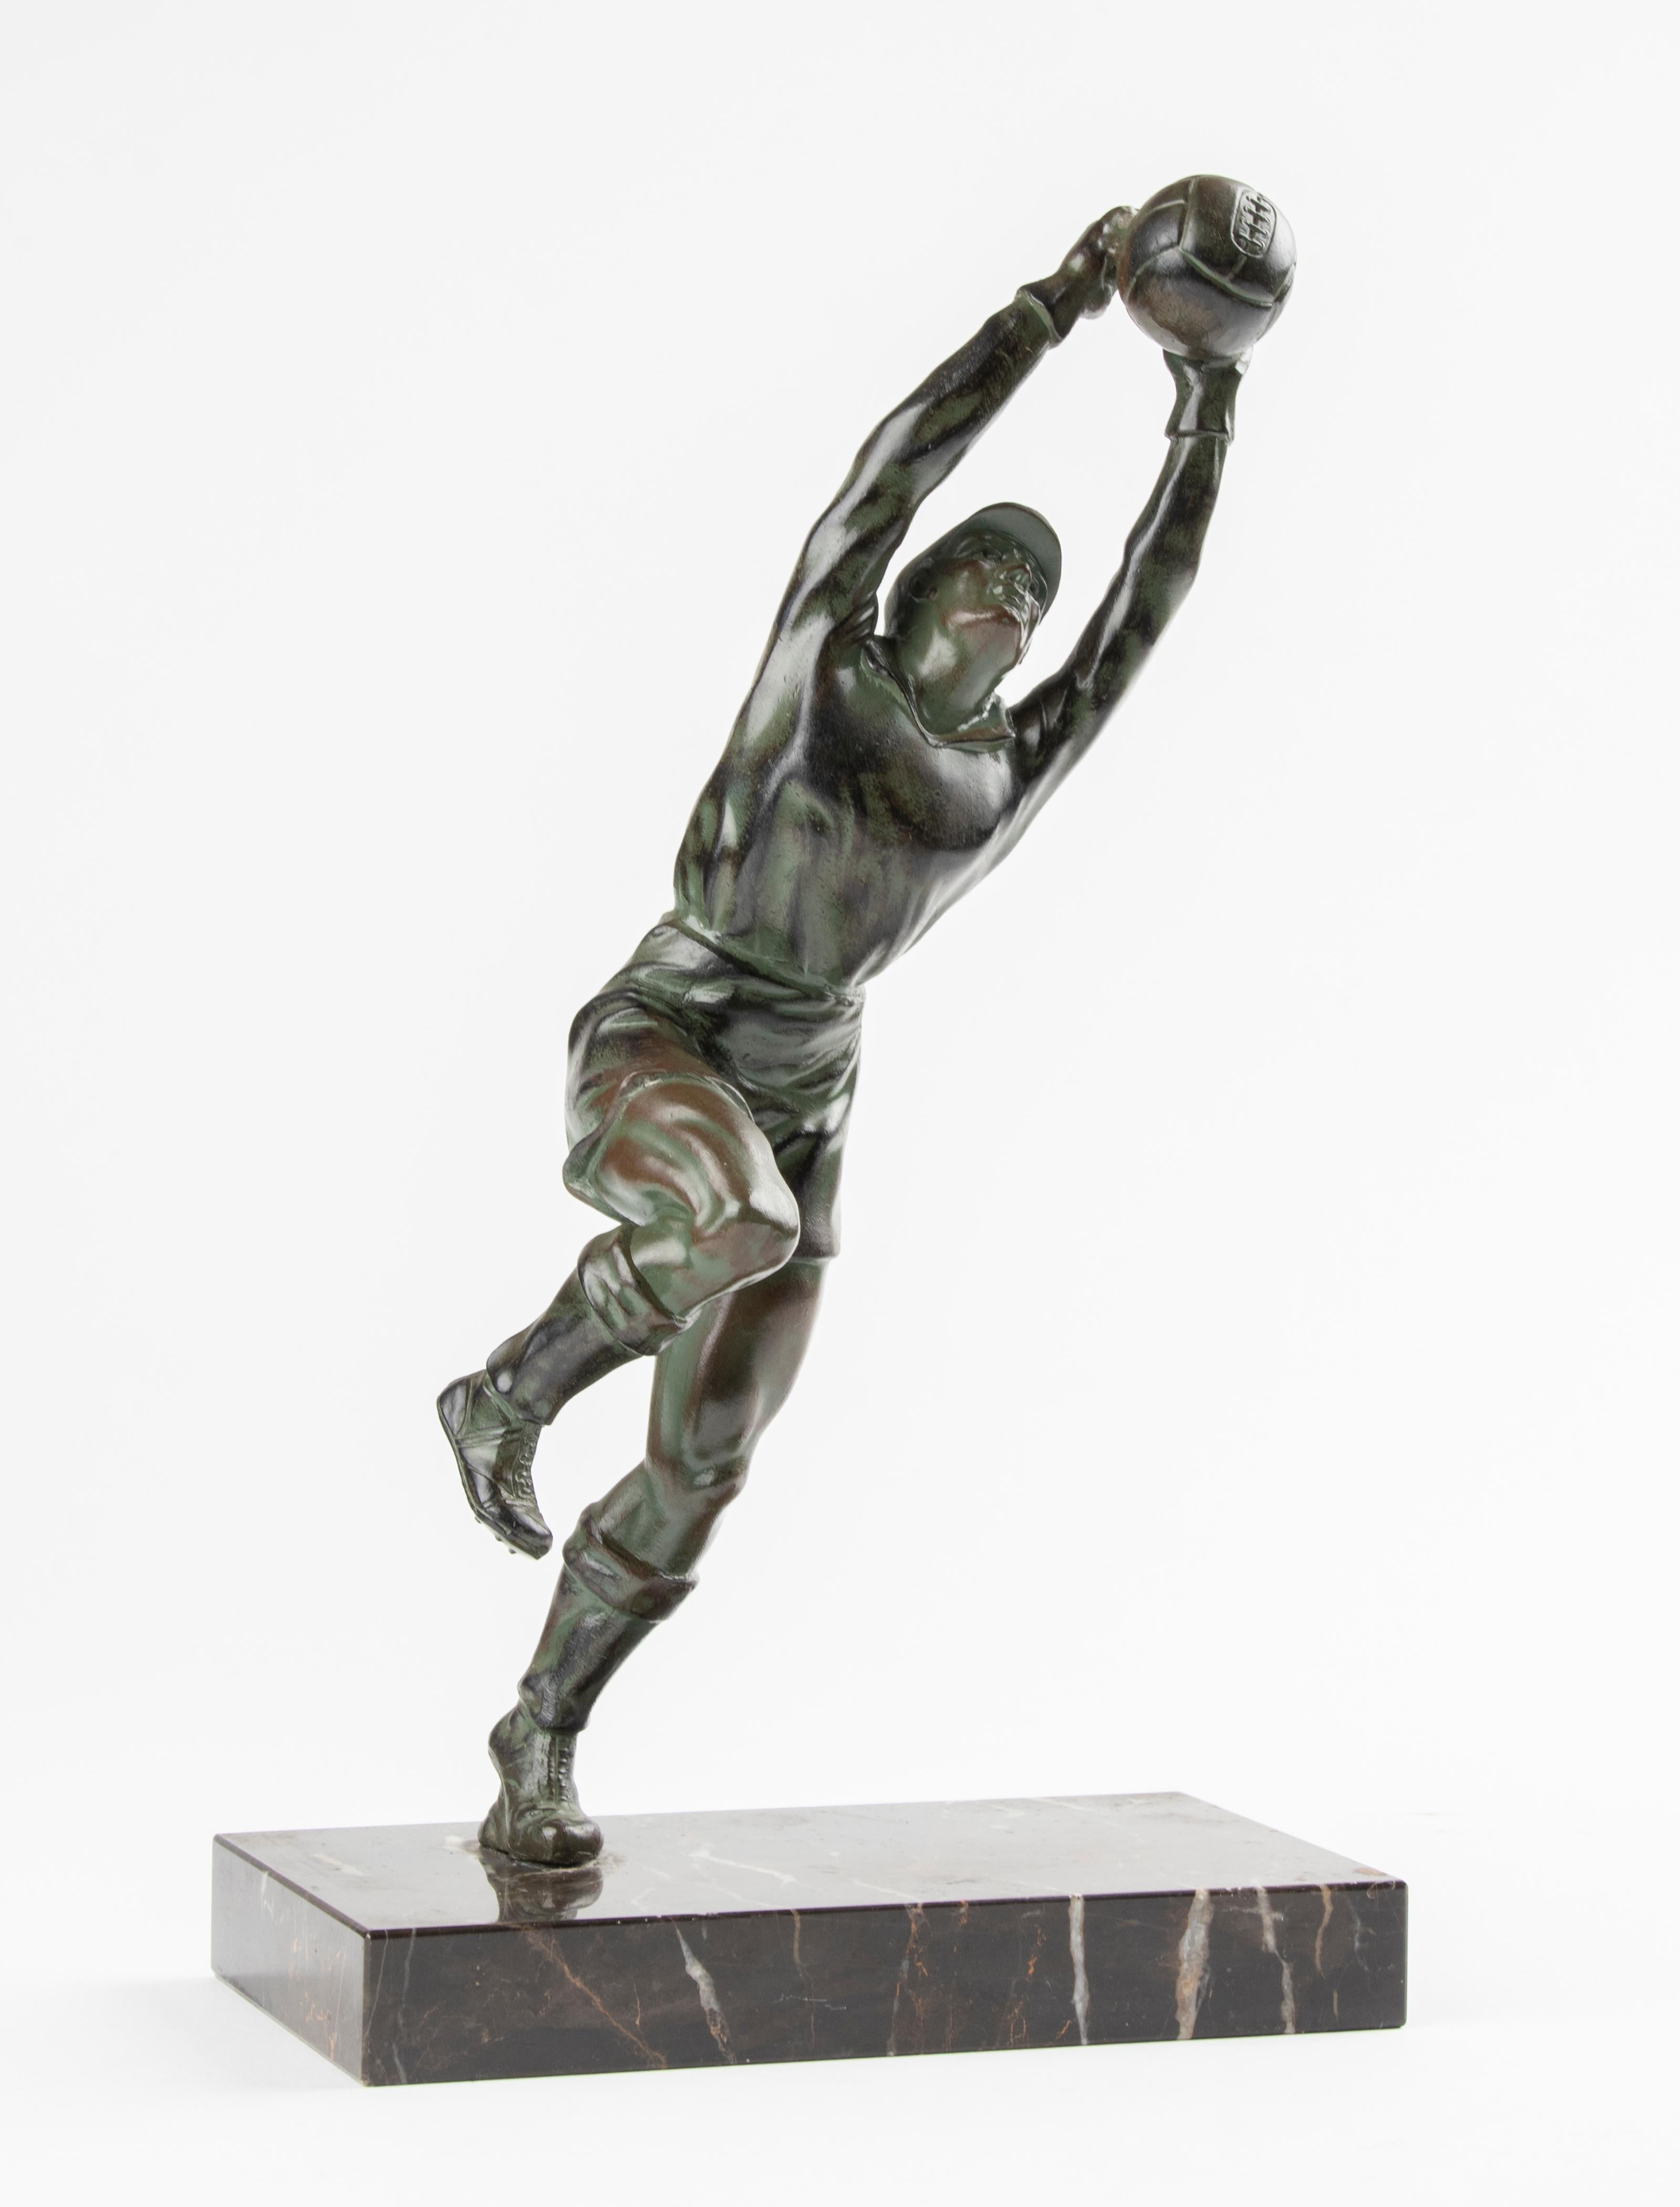 An Art Deco style sculpture of a football goalkeeper. The sculpture is made of cast spelter (zinc alloy), with a green patina. Standing on a marble plinth. Made in Belgium, circa 1950-1960.